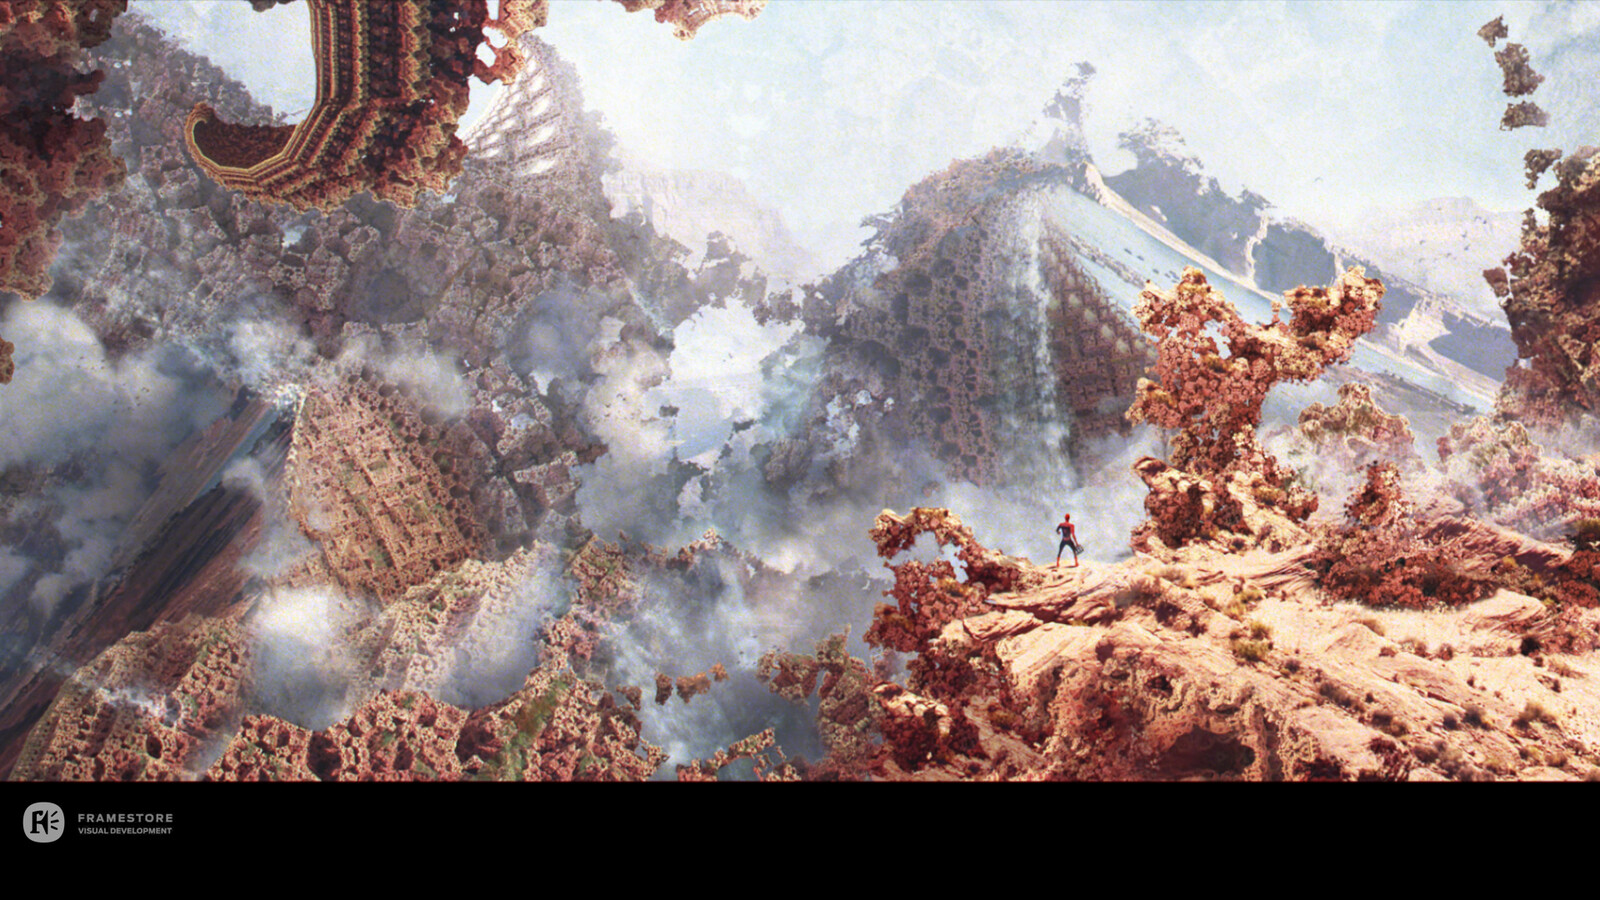 Early quick look test(cg Based) for the Fractals extravaganza in the Grand Canyon sequence